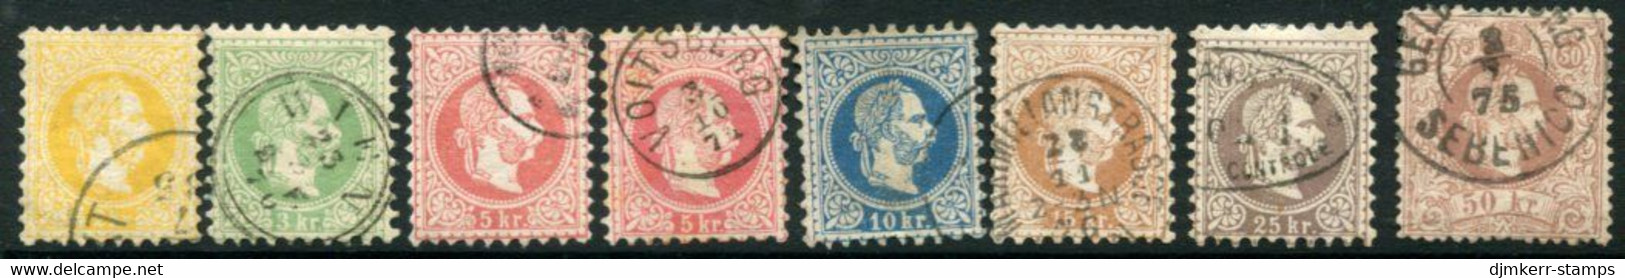 AUSTRIA 1867 Franz Joseph  Coarse Printing Set With Both Types Of The 5 Kr Used.  Michel 35-41 . - Used Stamps